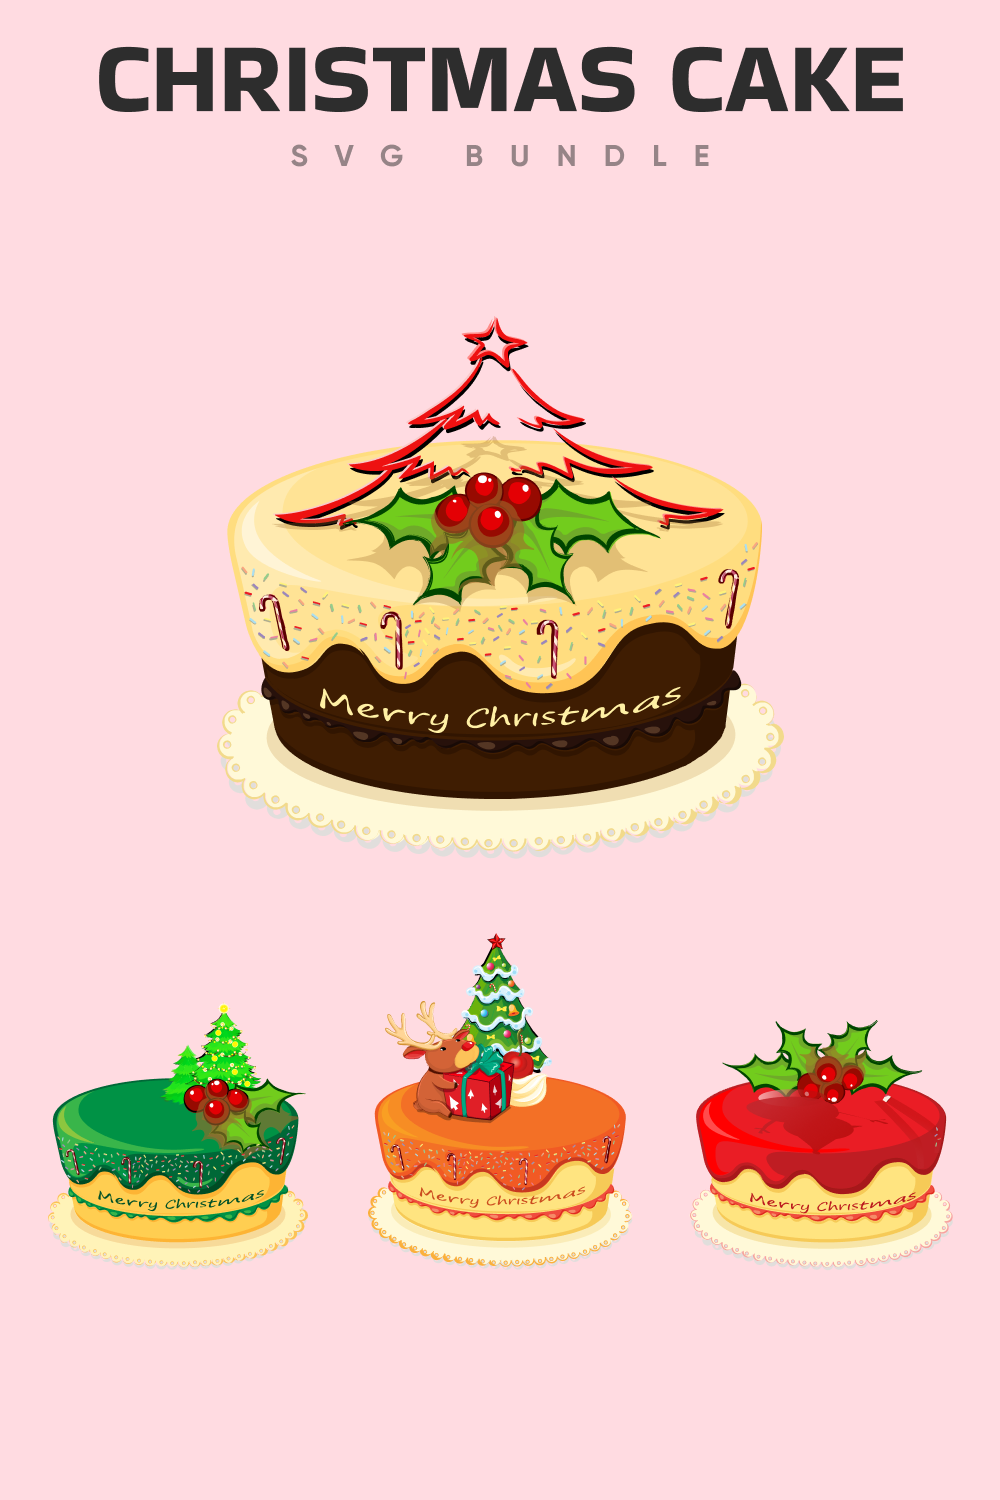 Some options of the festive Christmas cakes.